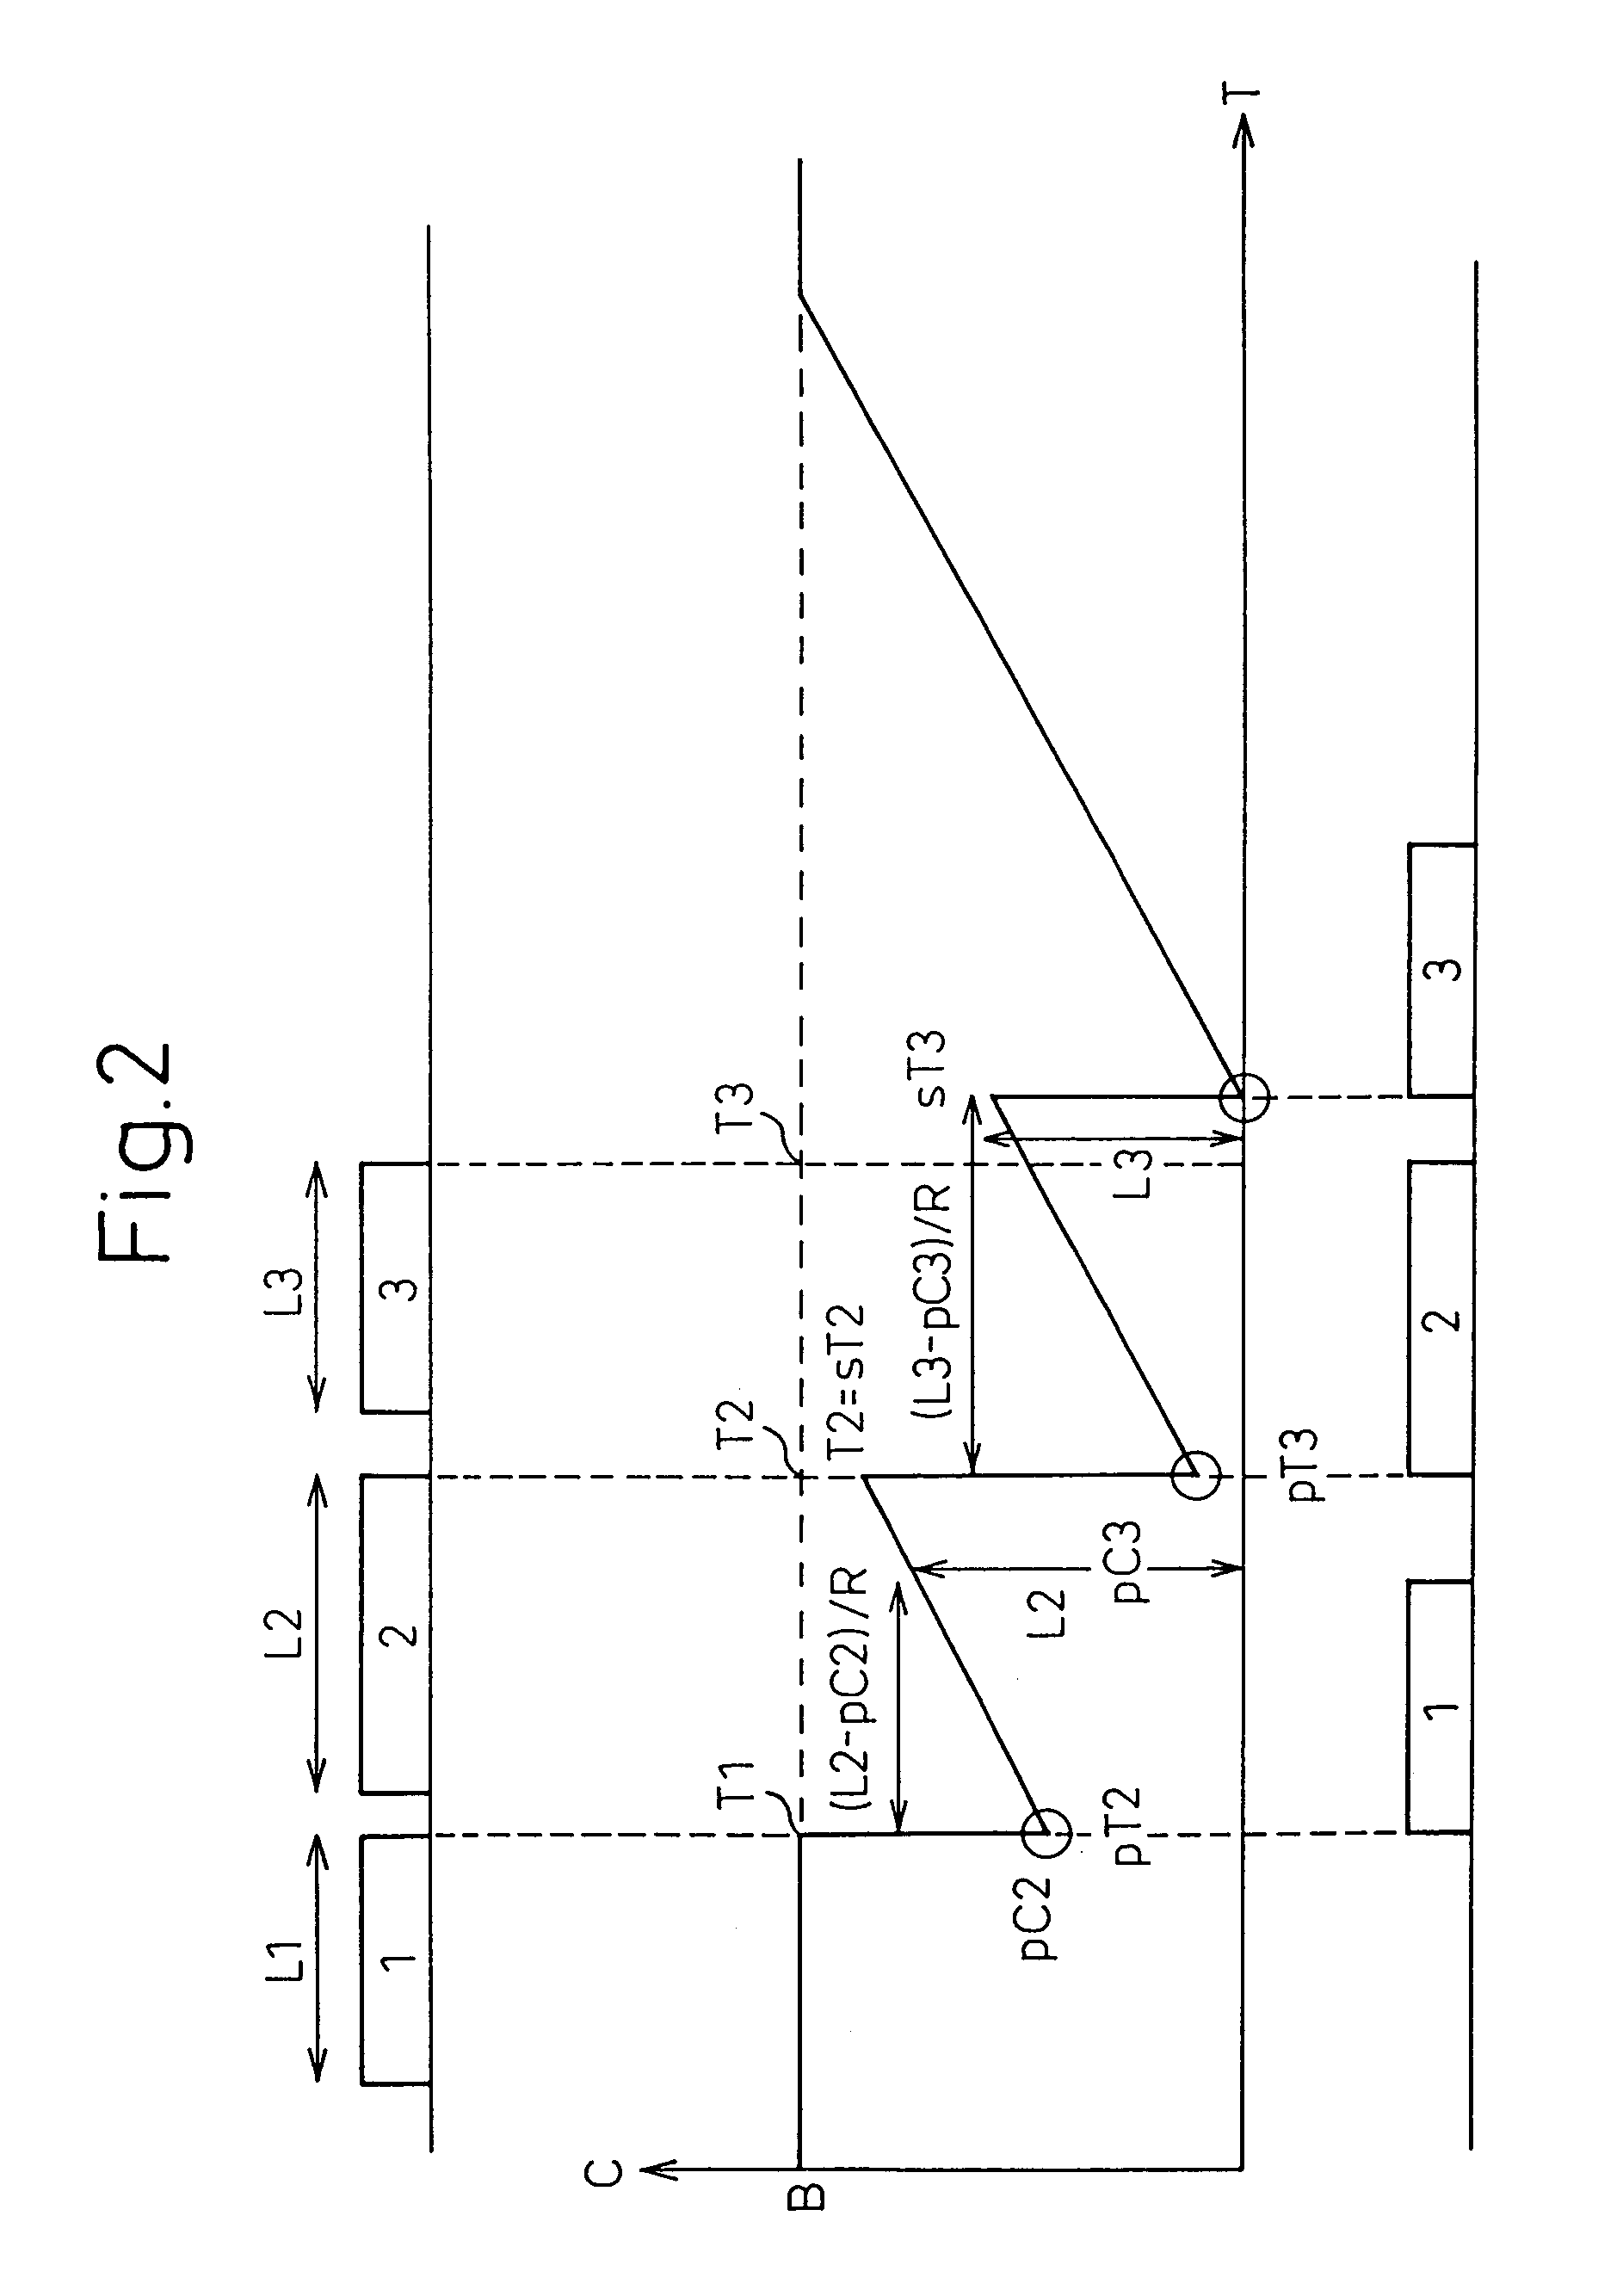 Packet flow control apparatus and a method for controlling the same